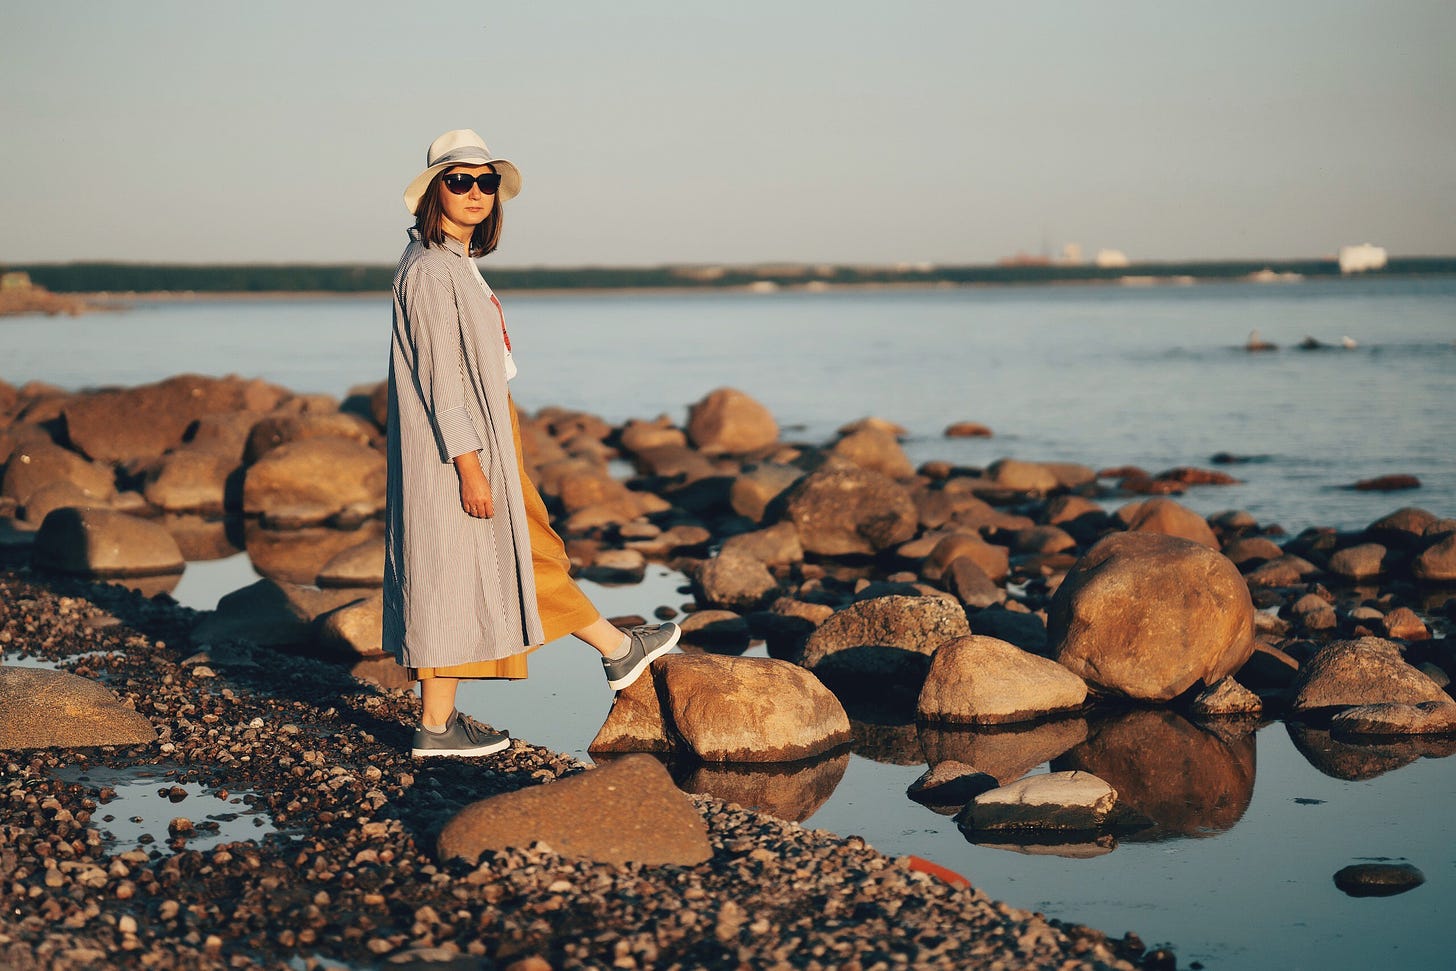 A woman in sunglasses and a long coat stands casually beside a river.